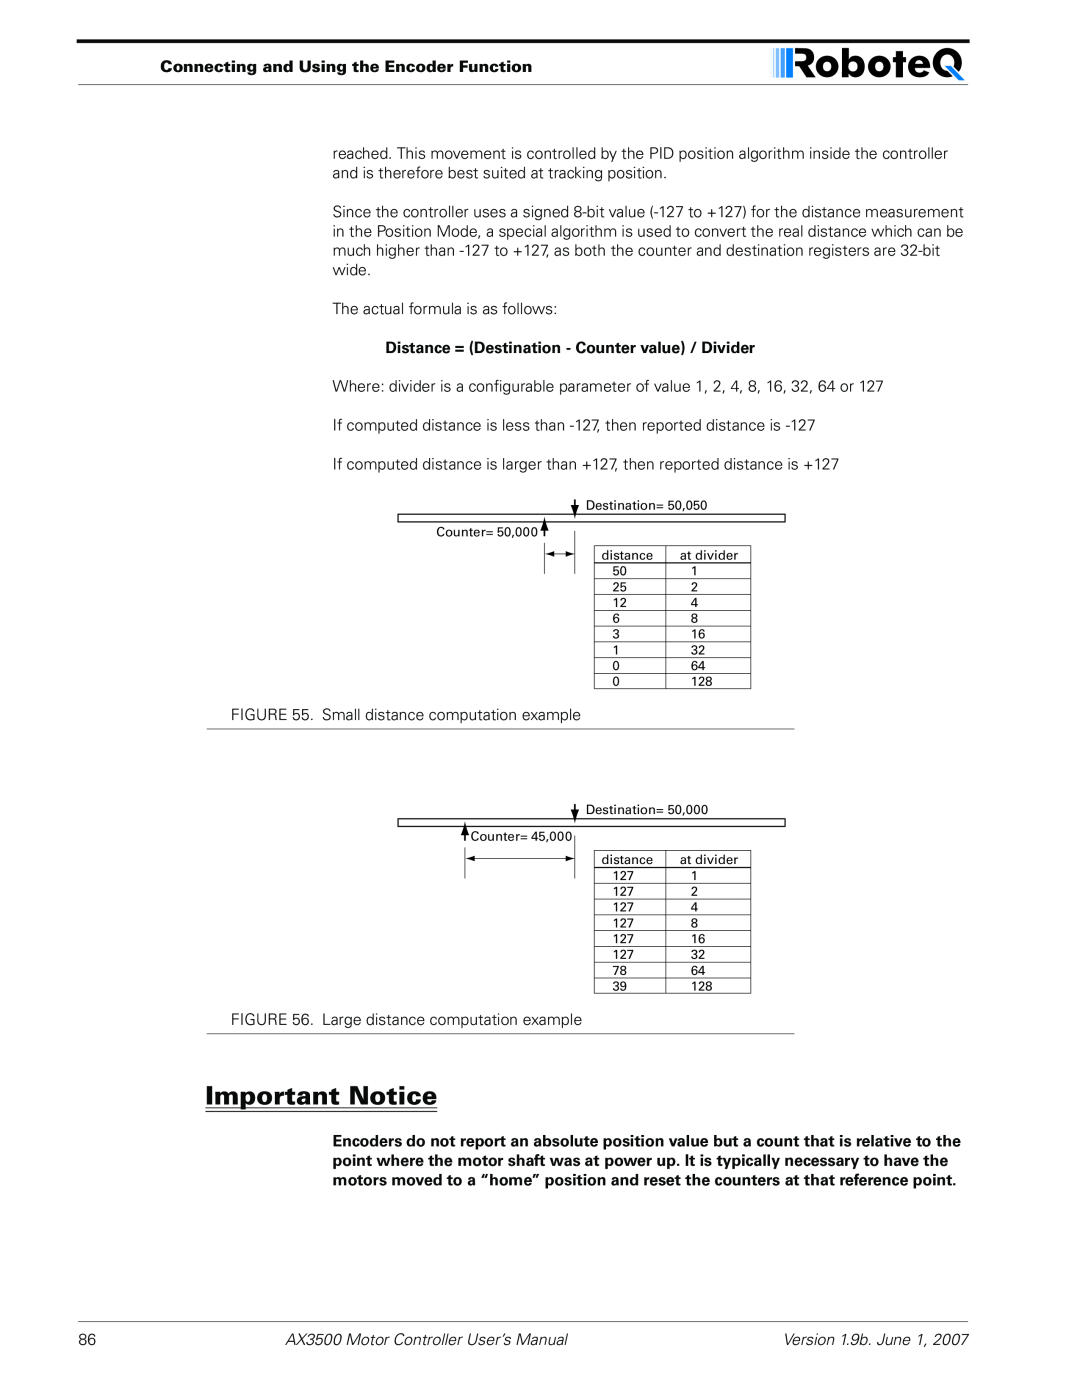 RoboteQ AX3500 user manual Important Notice, Connecting and Using the Encoder Function, The actual formula is as follows 